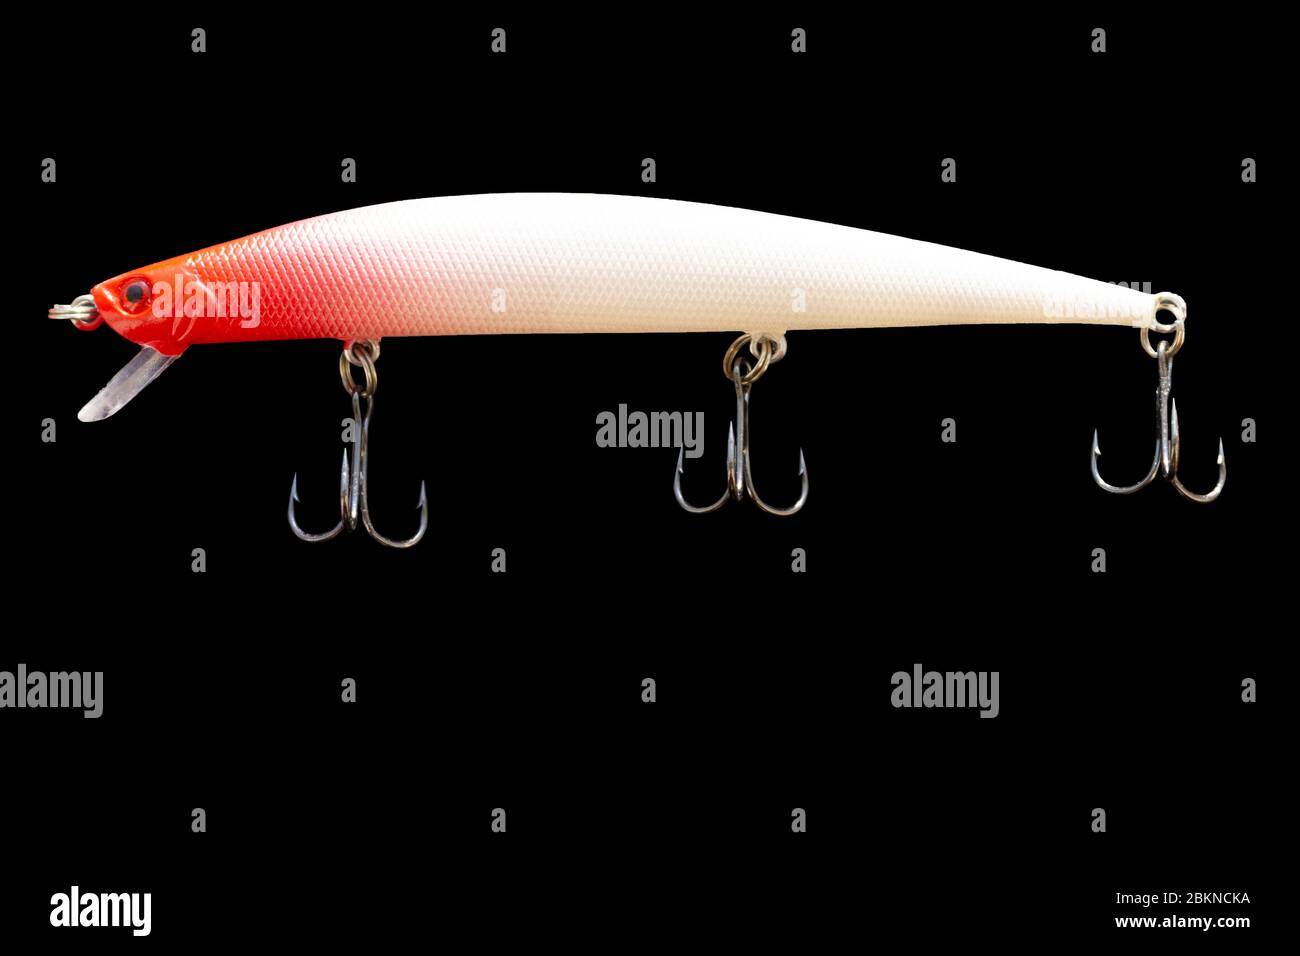 https://c8.alamy.com/comp/2BKNCKA/yellow-wobbler-fishing-lure-wobbler-popper-on-wood-background-with-an-two-hooks-relax-at-home-place-for-text-photo-for-typography-poster-banner-2BKNCKA.jpg